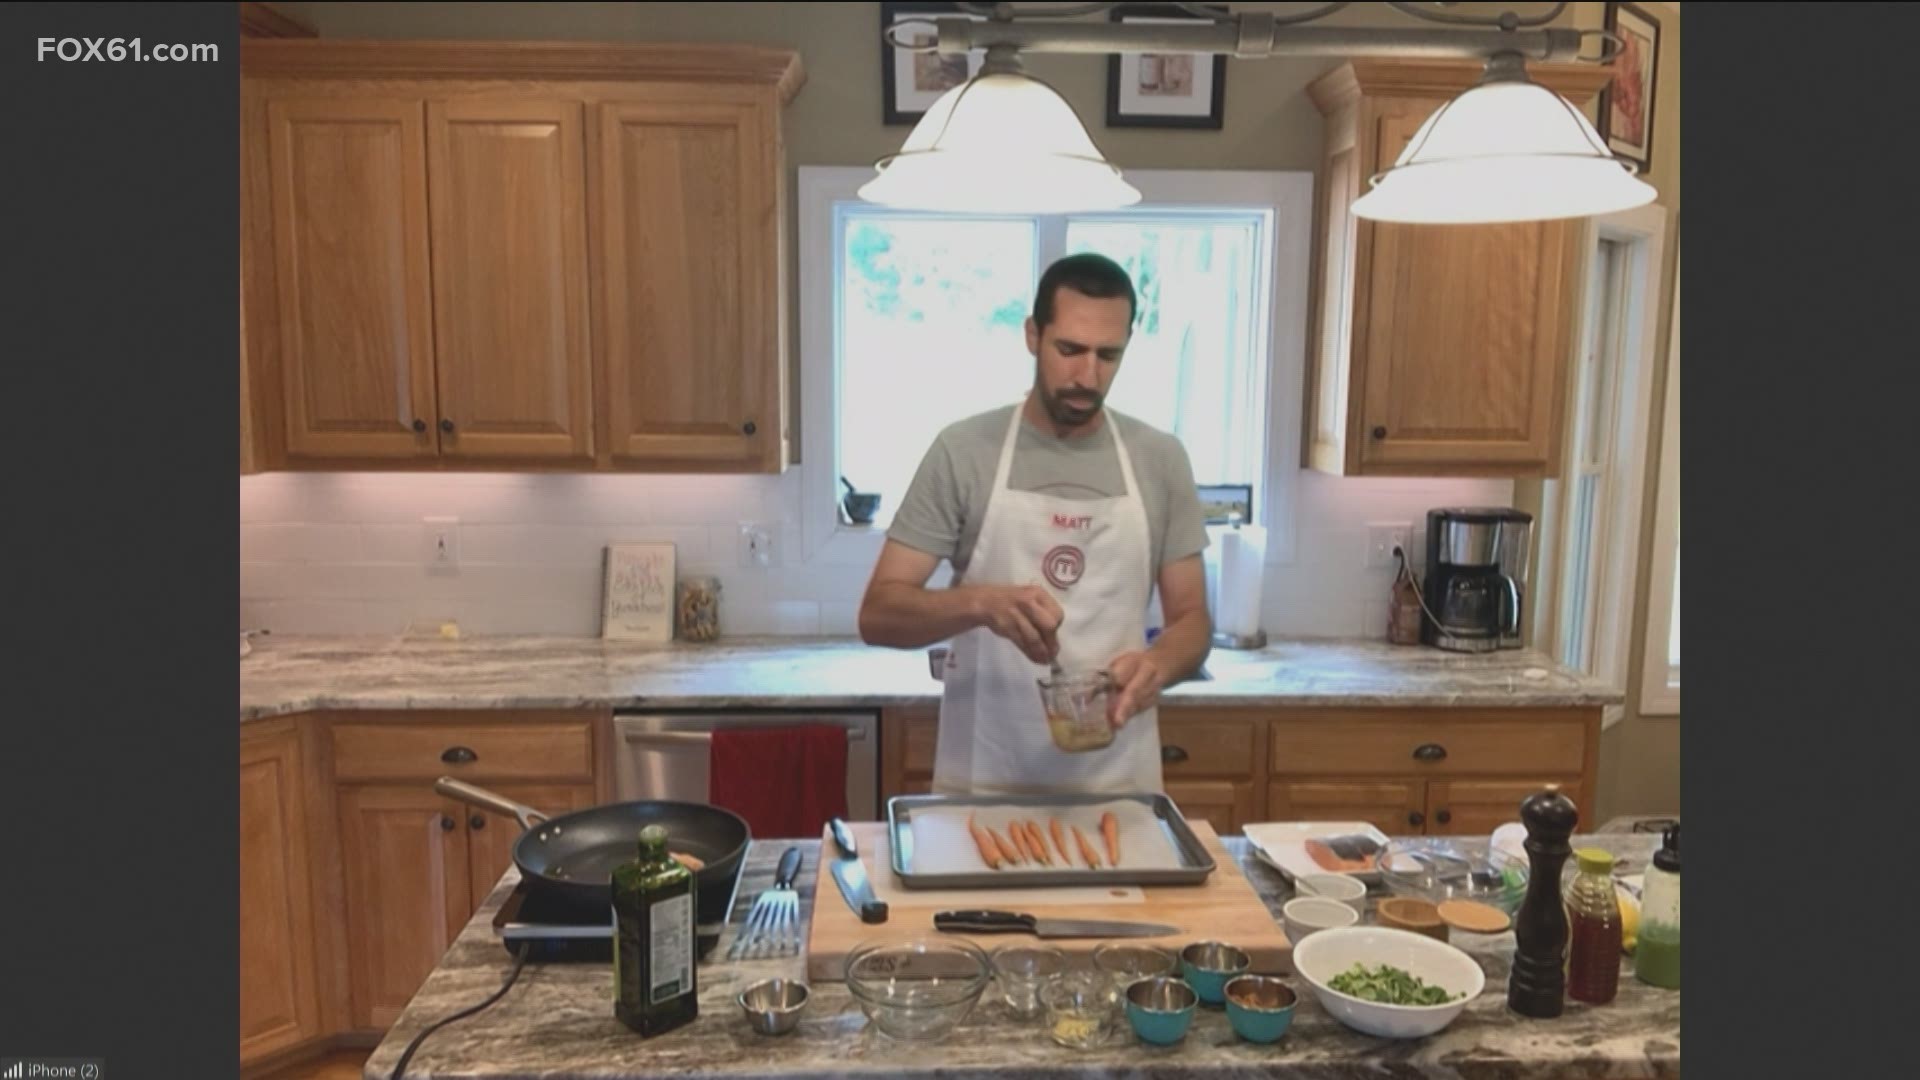 Matt earned his white apron on the first episode of the new season after cooking for Gordon Ramsay, Aarón Sanchez, and Joe Bastianich.